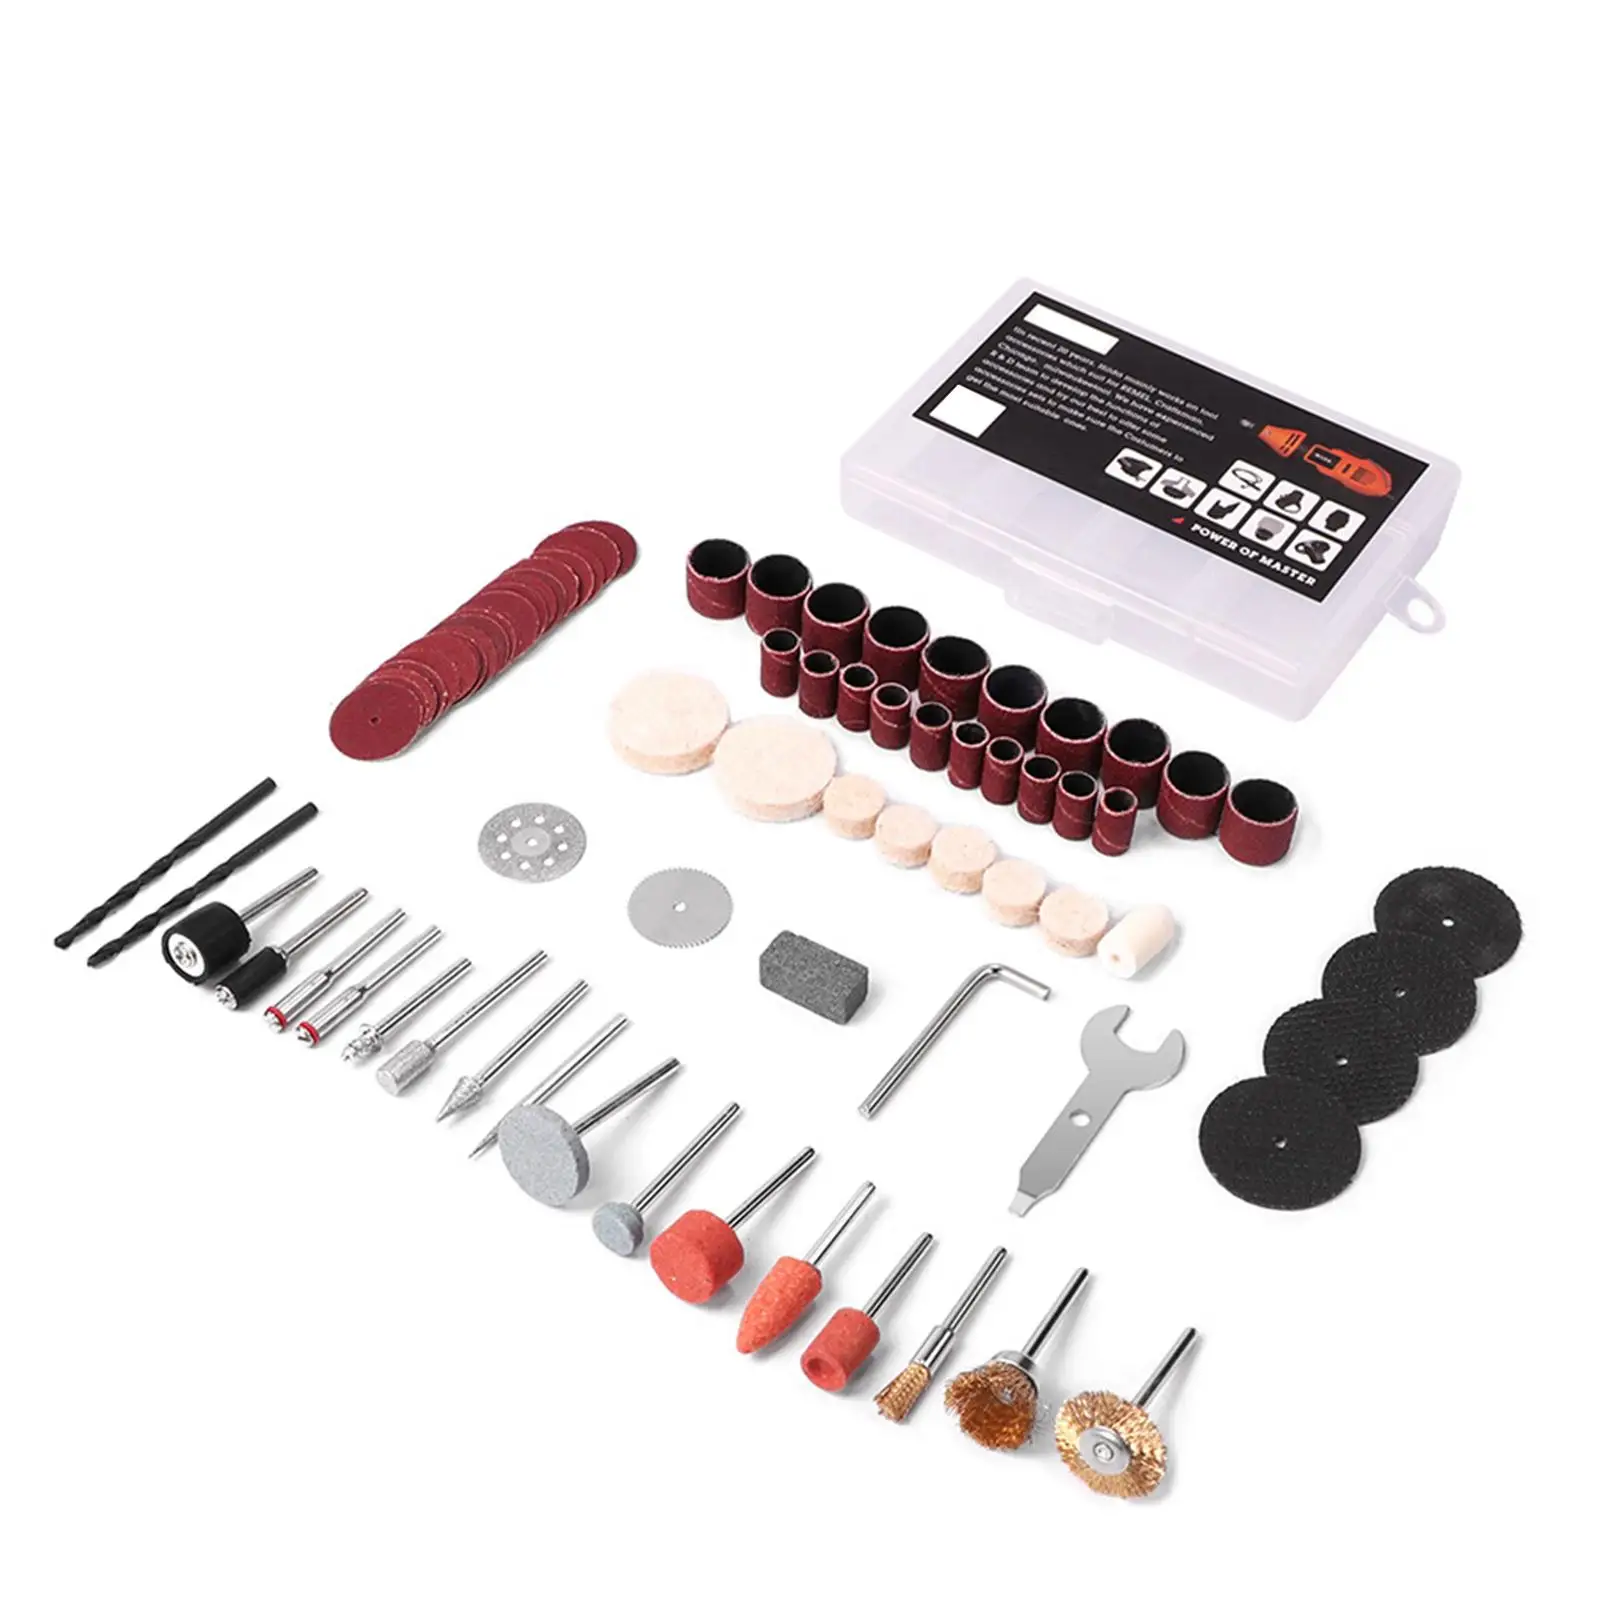 92x Drill Bit Set Cutting Grinding Sanding Drilling Carving Engraving and Polishing Grinder Electric Grinding Head Set for Glass